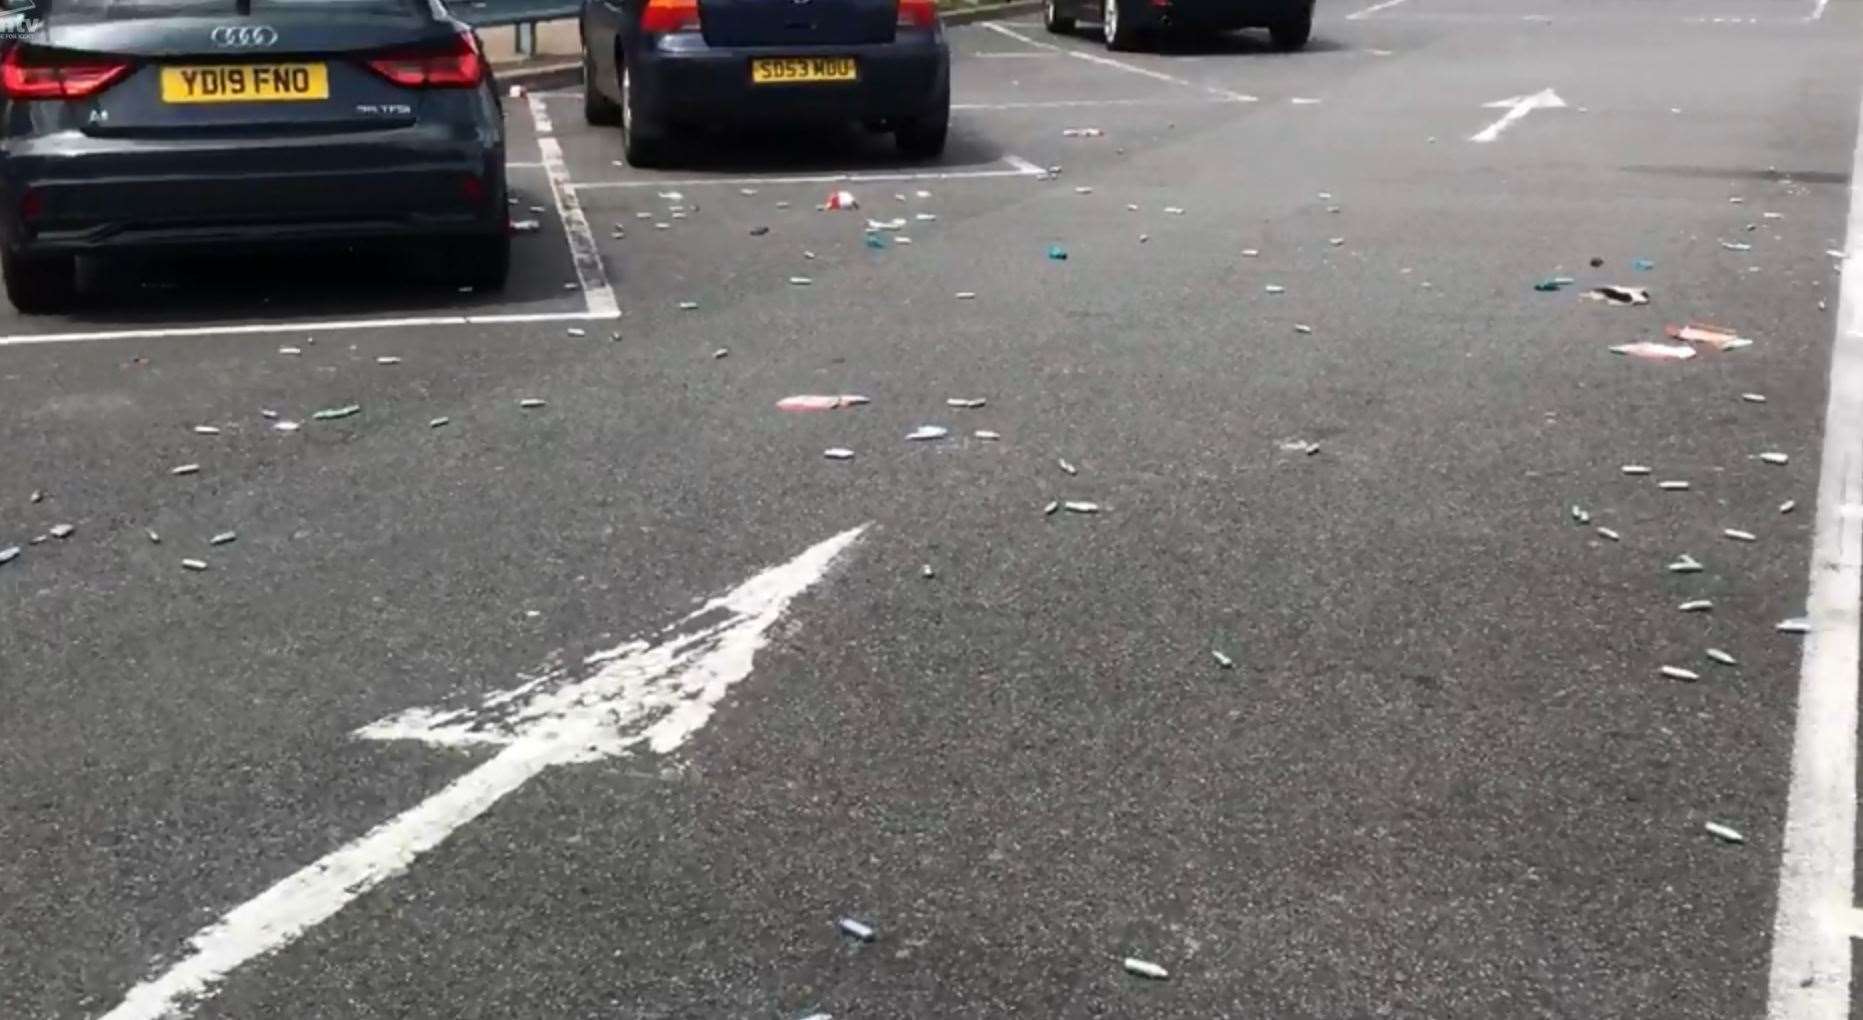 Hundreds of canisters were found littered in Dartford's Westgate car park (13279097)